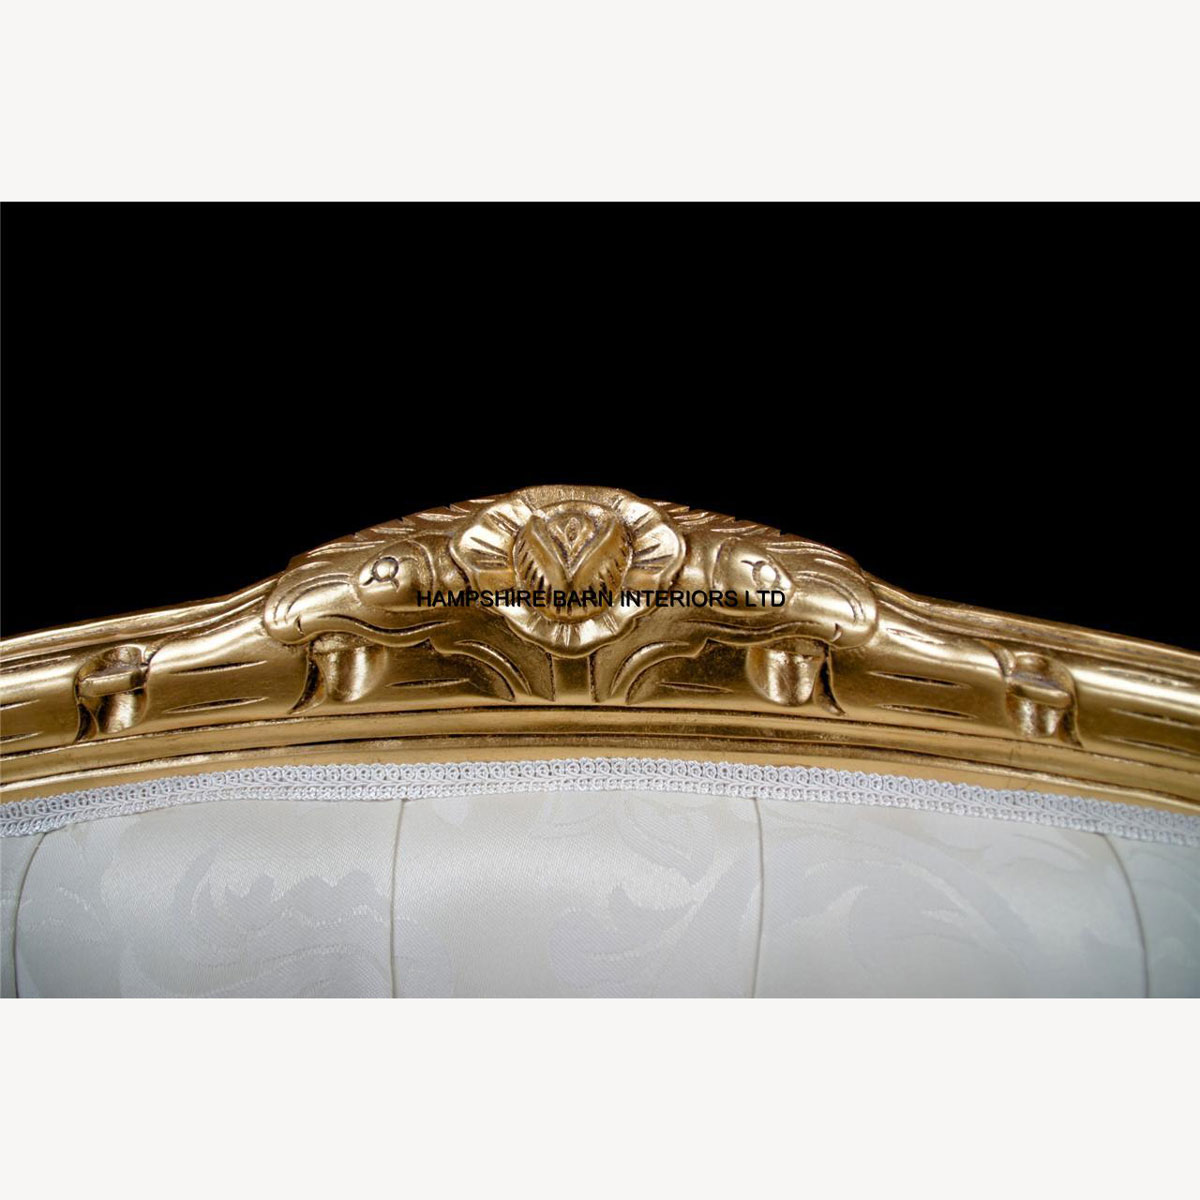 Double Ended Gold Ivory French Louis Ornate Chaise Longue Sofa Home Salon 2 - Hampshire Barn Interiors - Double Ended Gold Ivory French Louis Ornate Chaise Longue Sofa Home Salon -